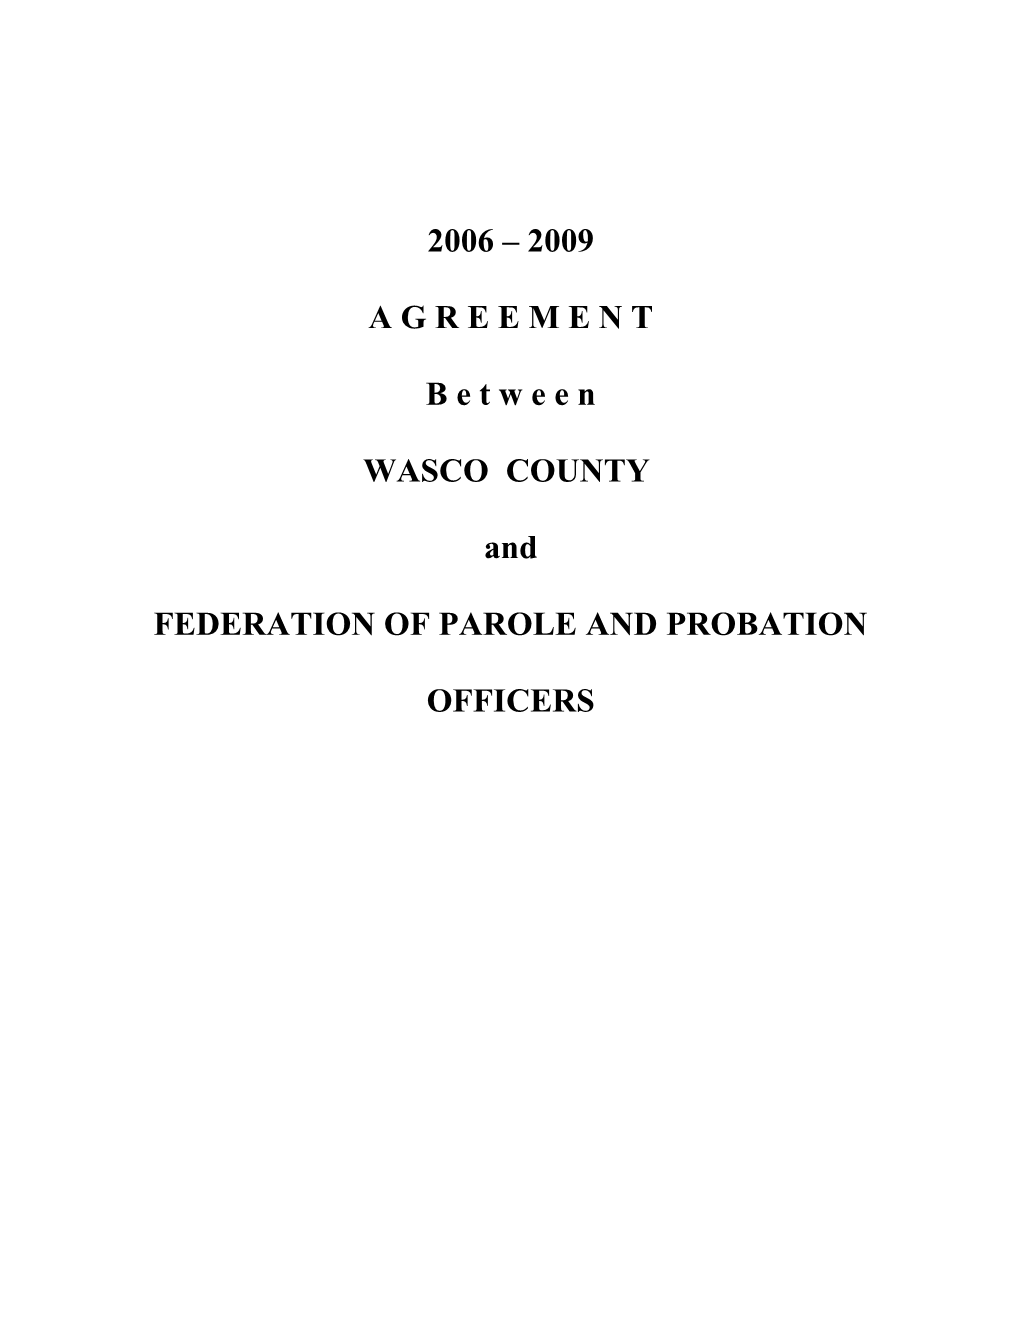 Federation of Parole and Probation Officers